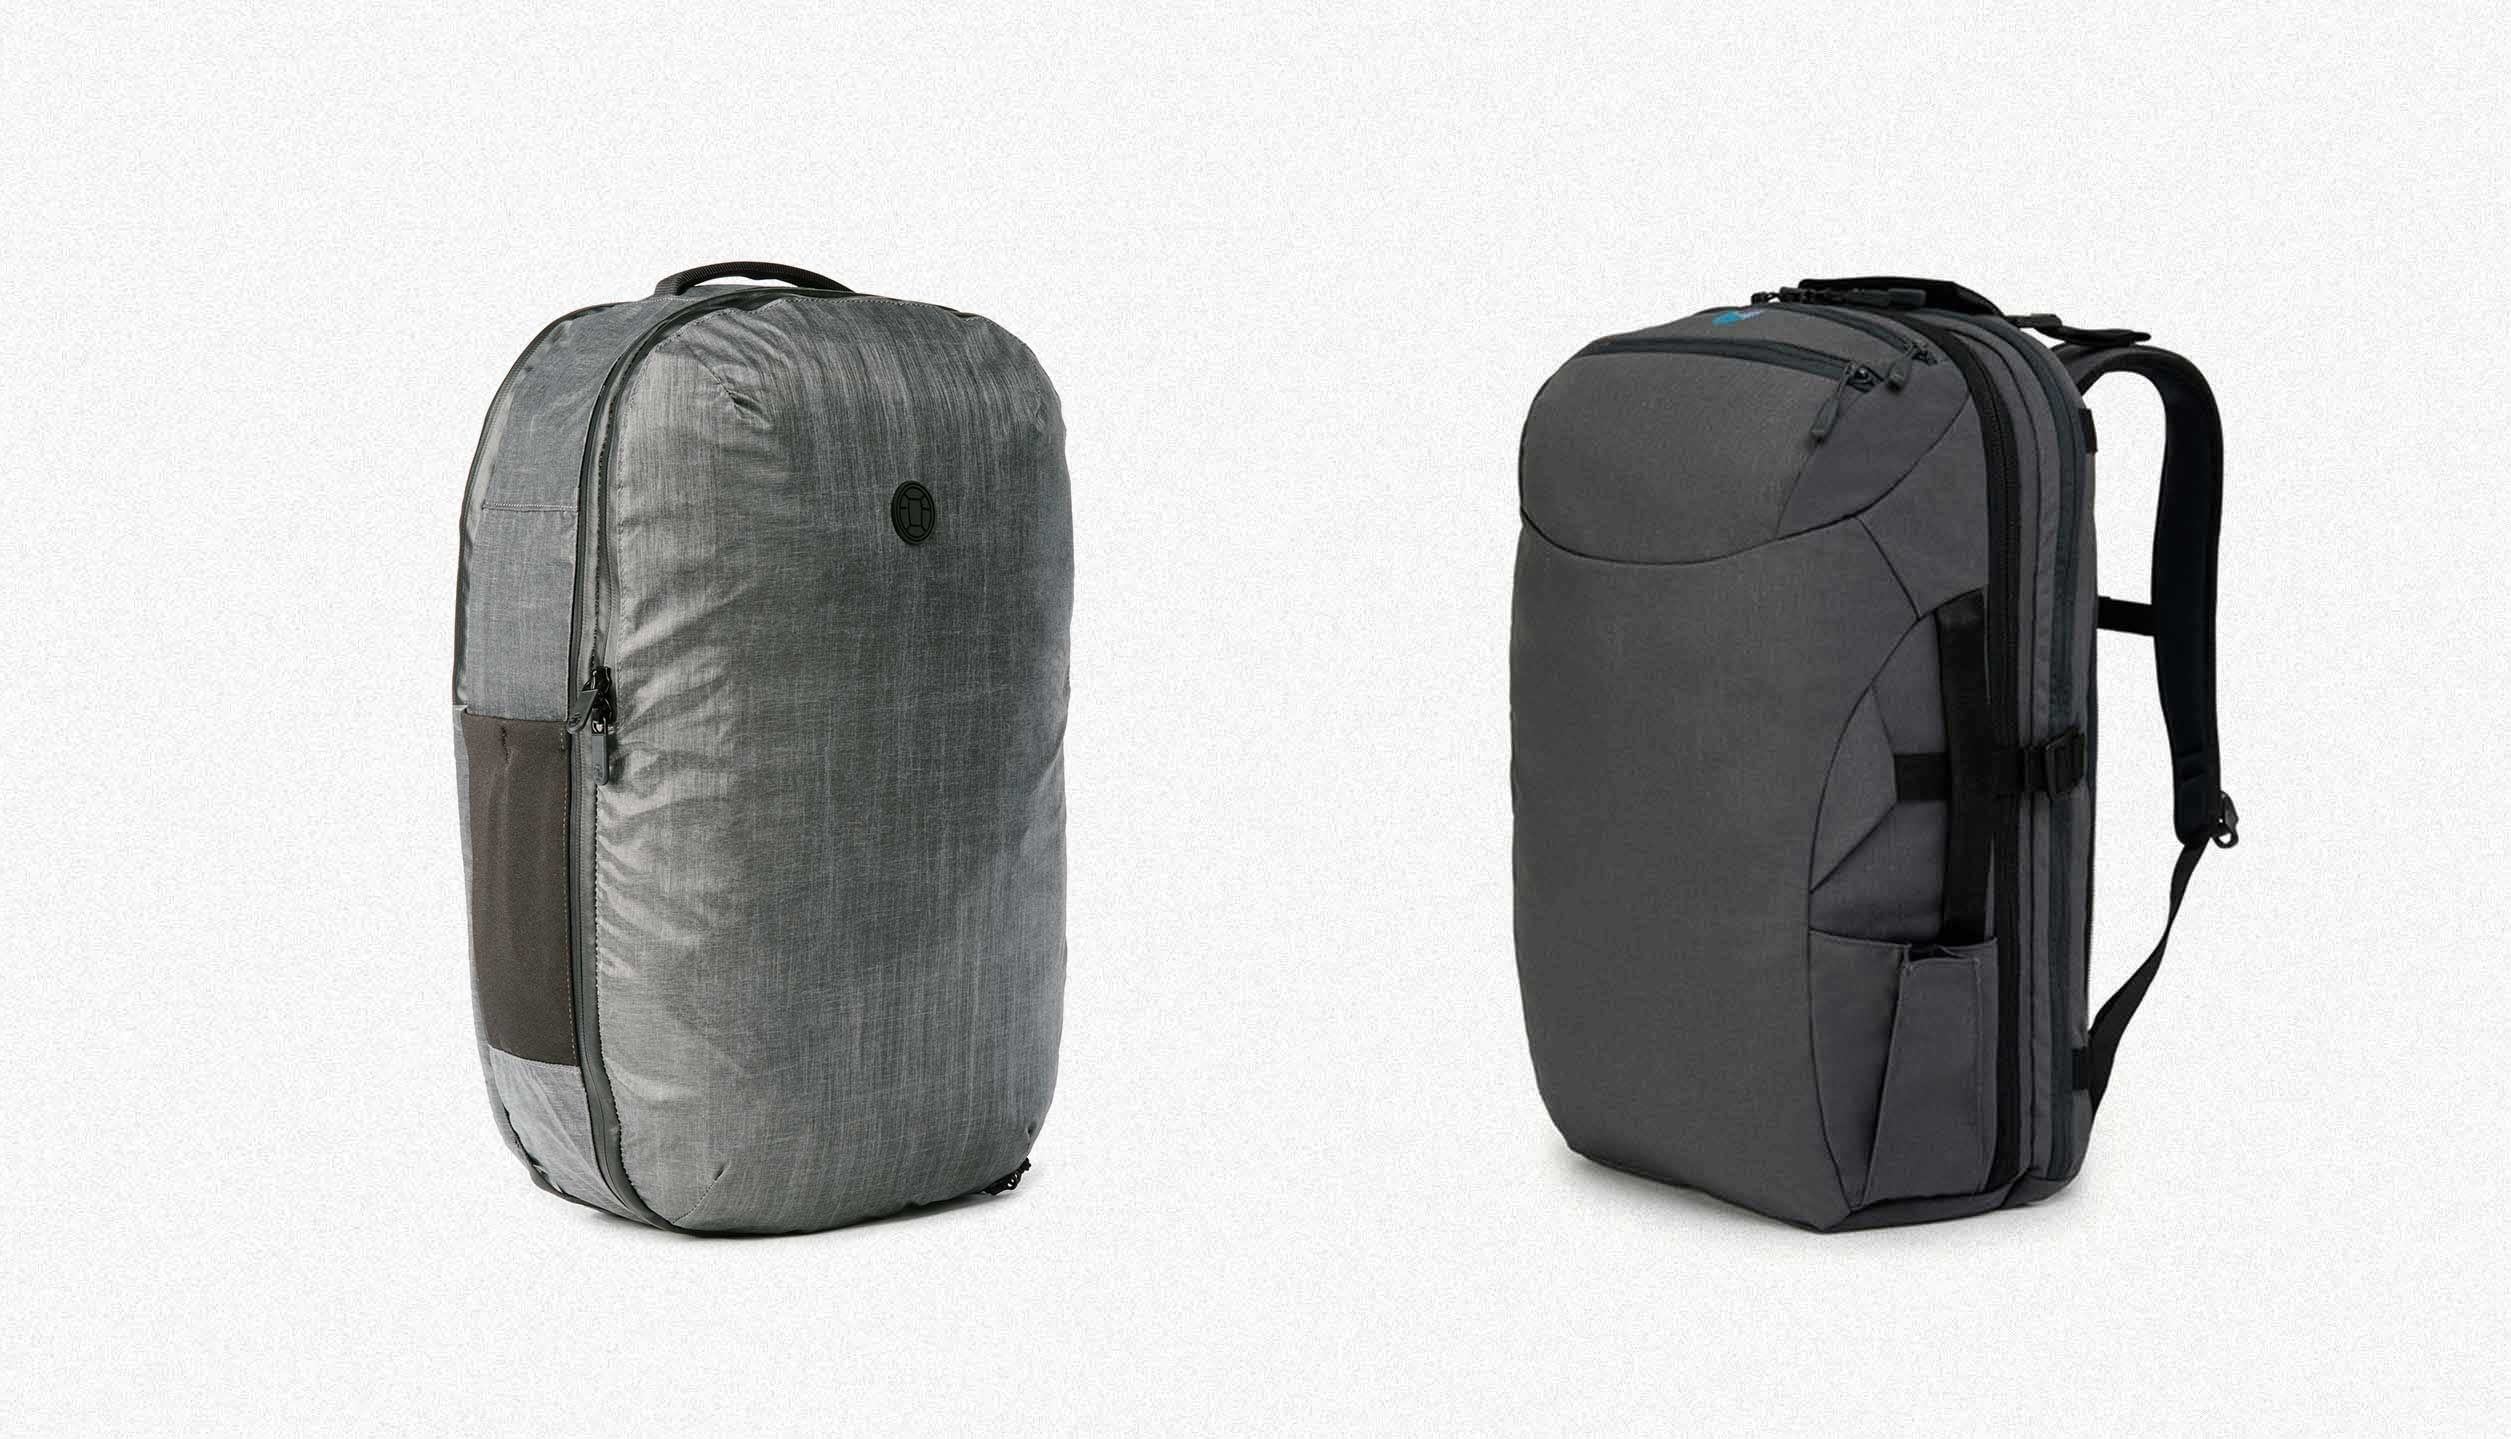 Tortuga Outbreaker Backpack Review: Is It Worth The Hype?